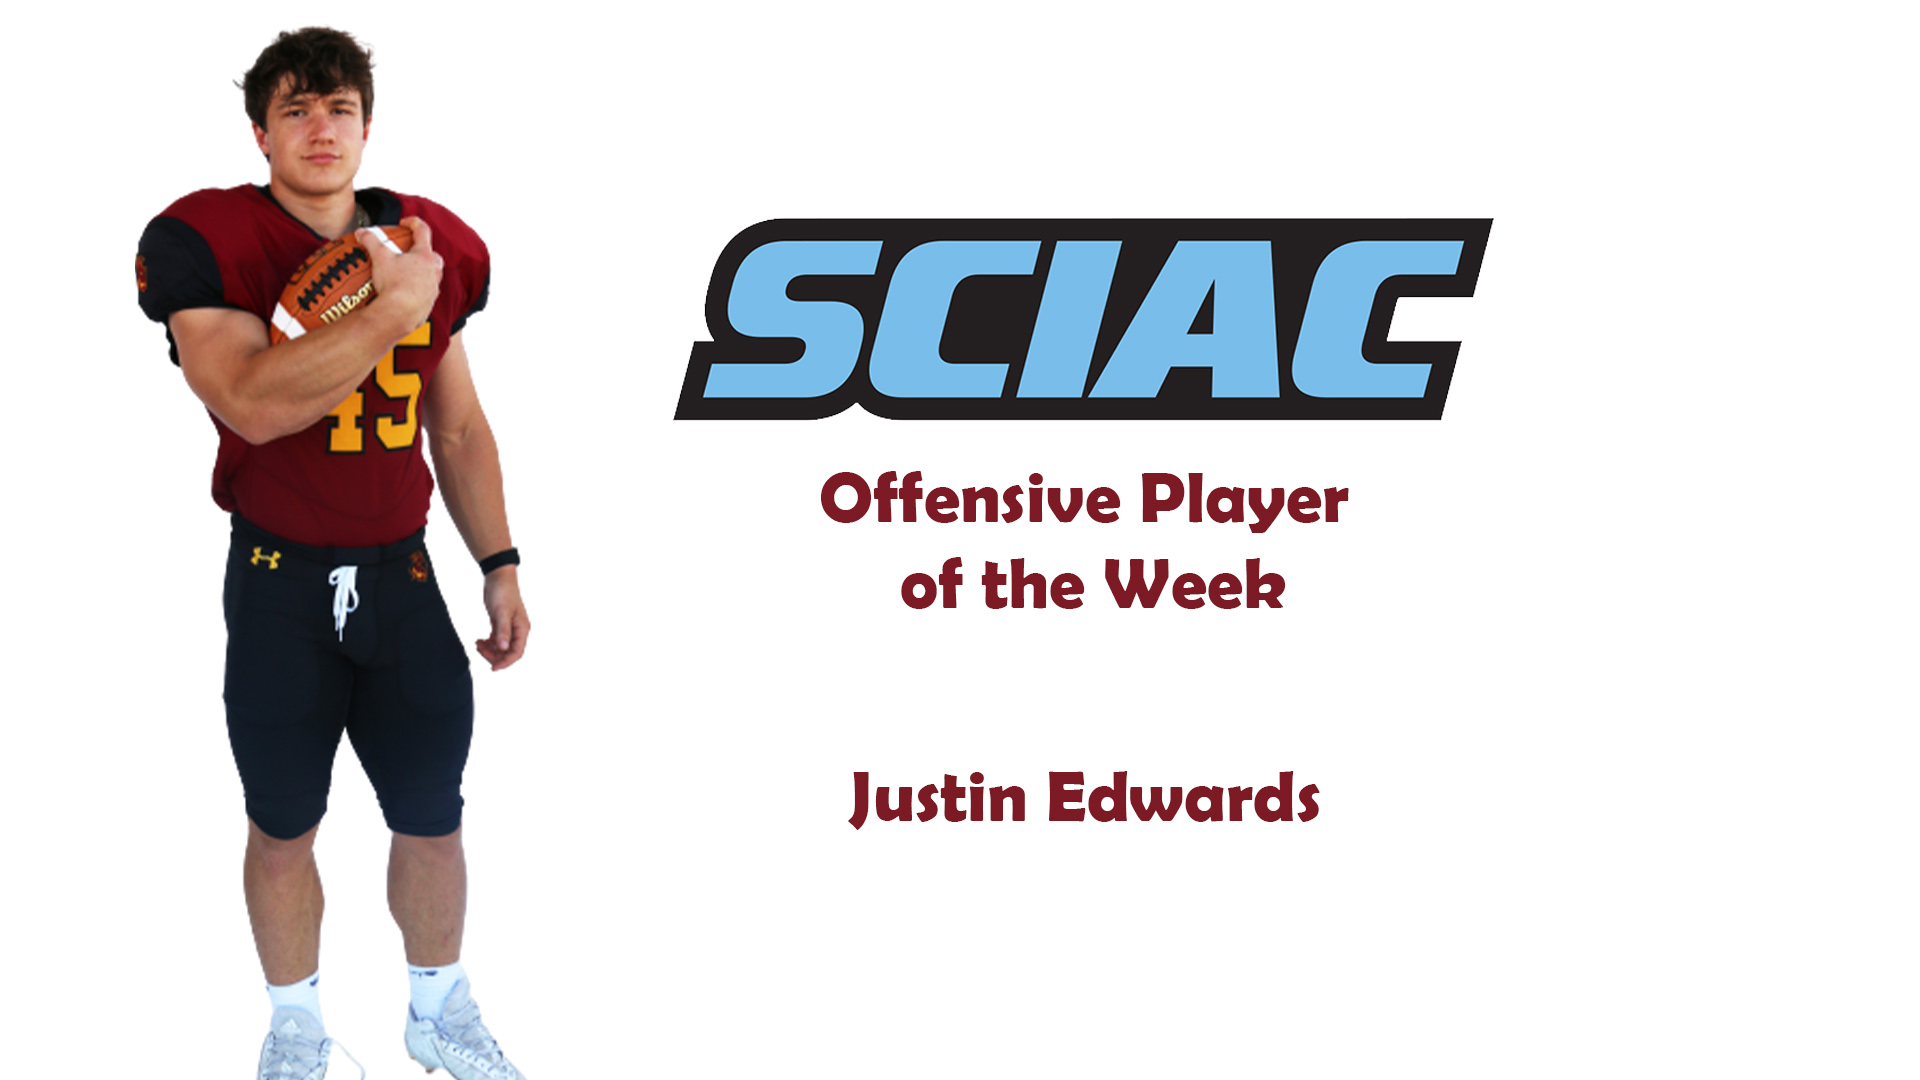 justin Edwards posed shot with the SCIAC logo